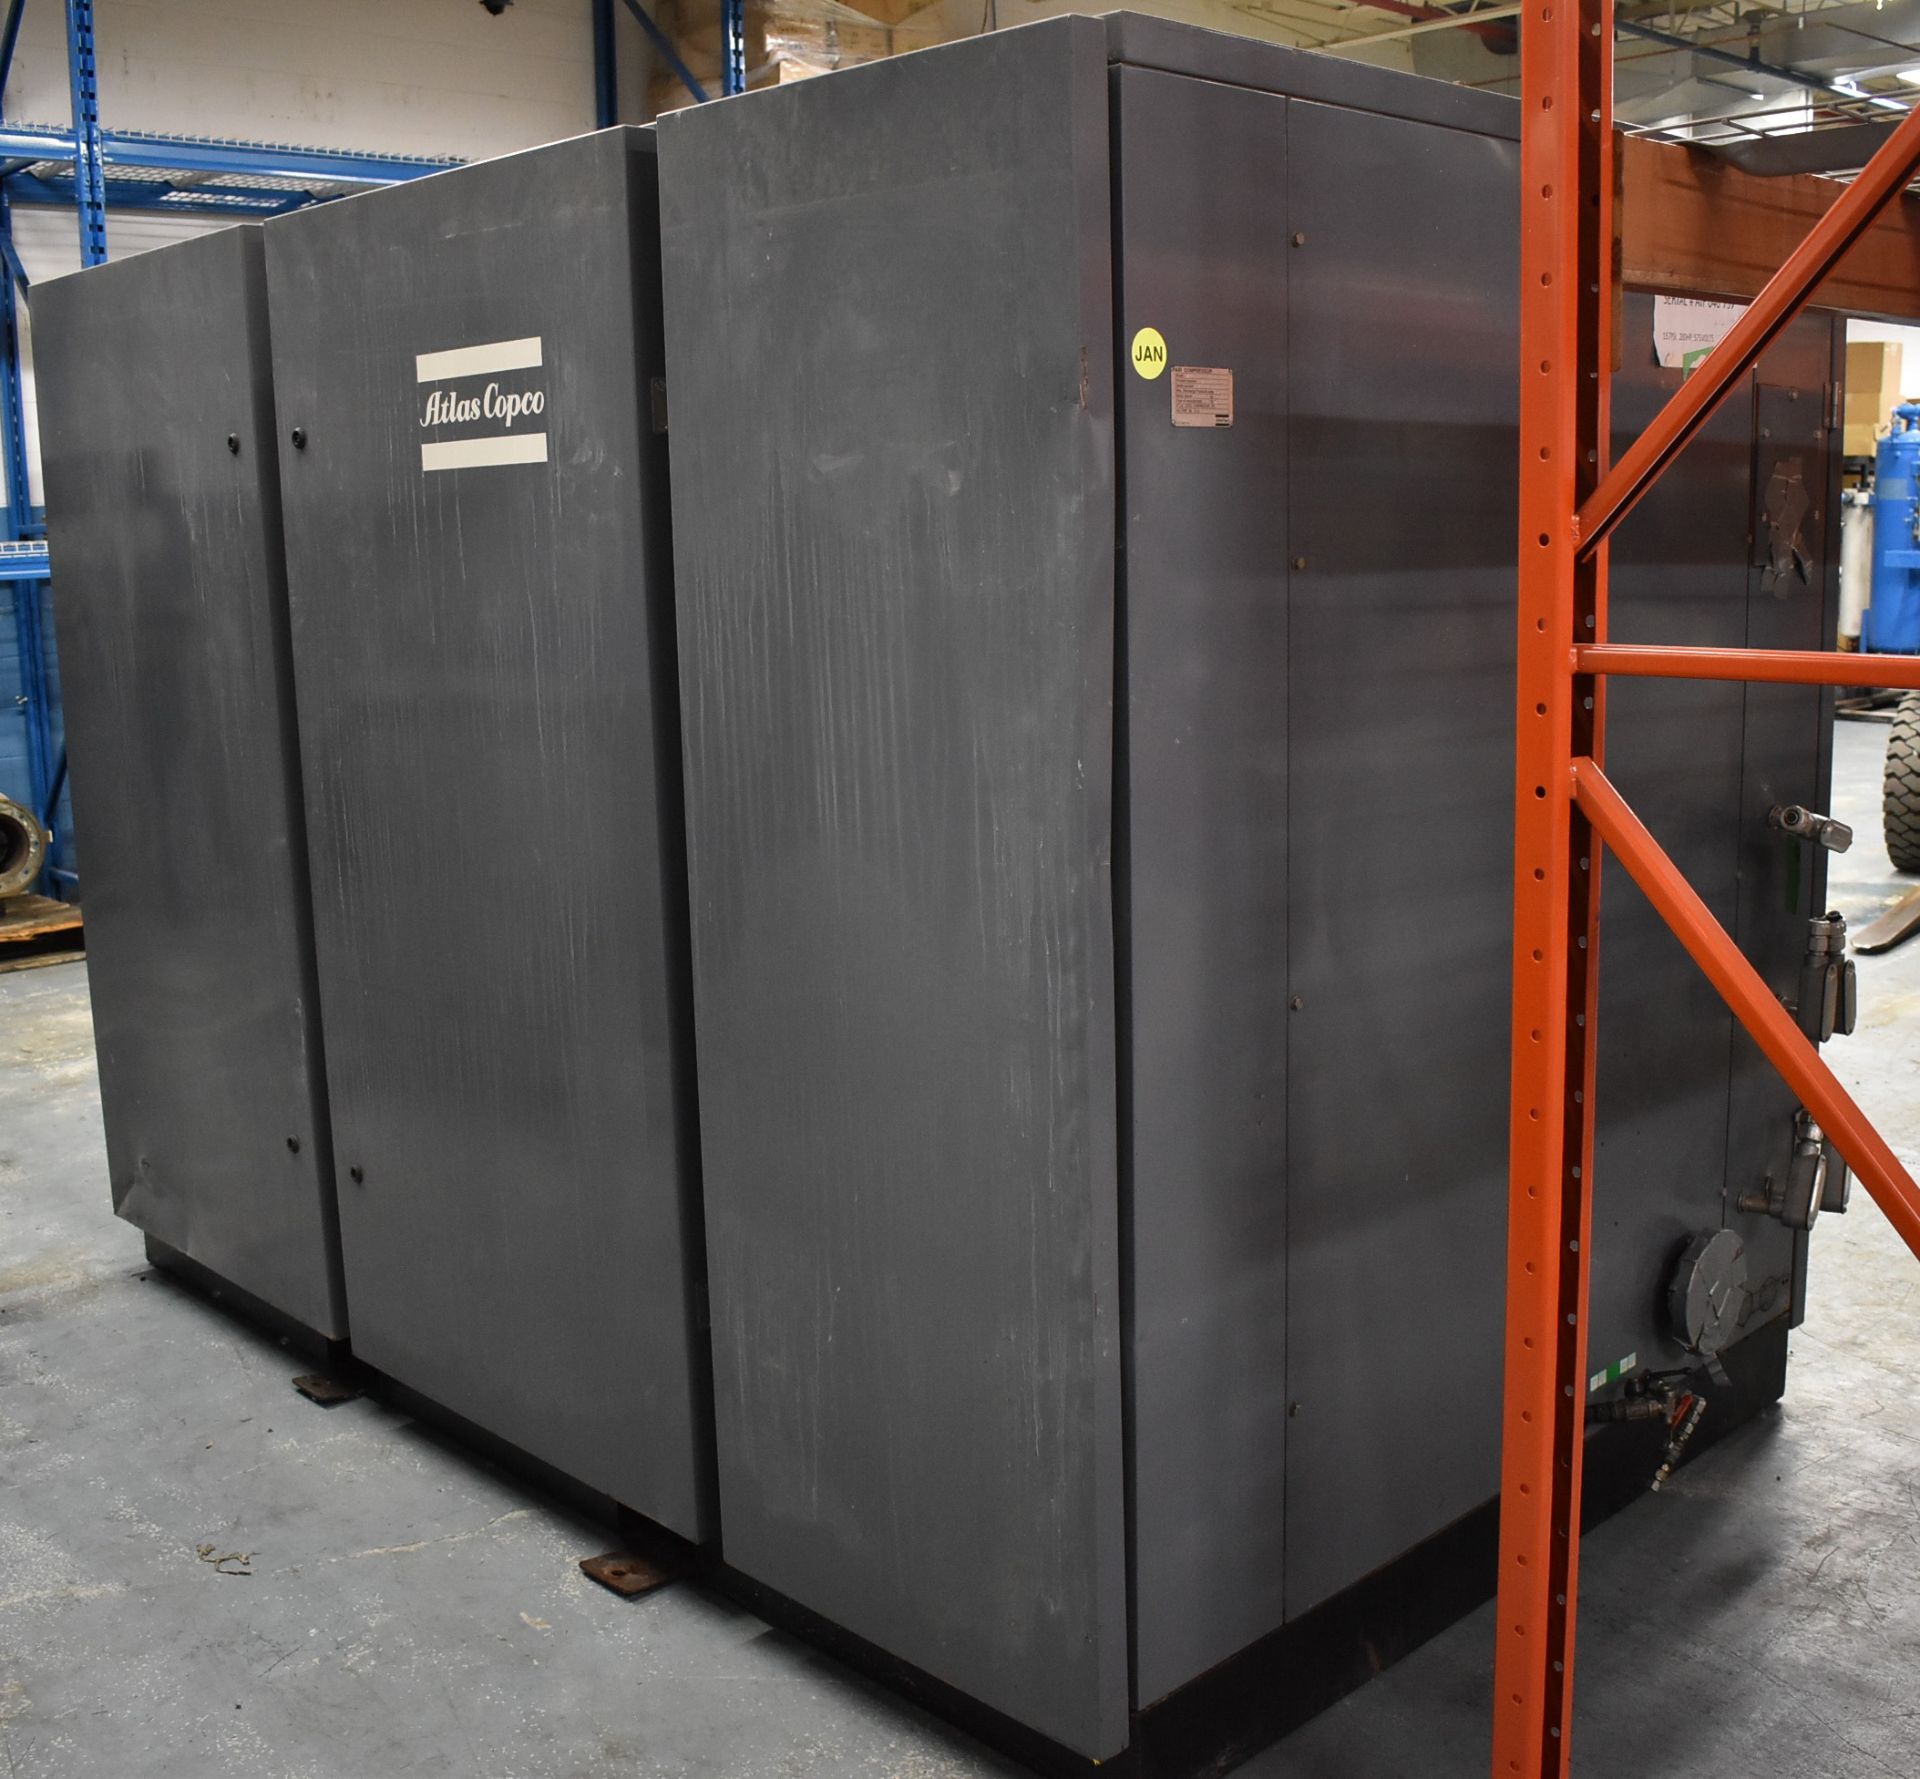 ATLAS COPCO GA160 ROTARY SCREW AIR COMPRESSORS WITH 200 HP, 157 PSI, S/N: AIF.040797 (CI) [RIGGING - Image 3 of 9